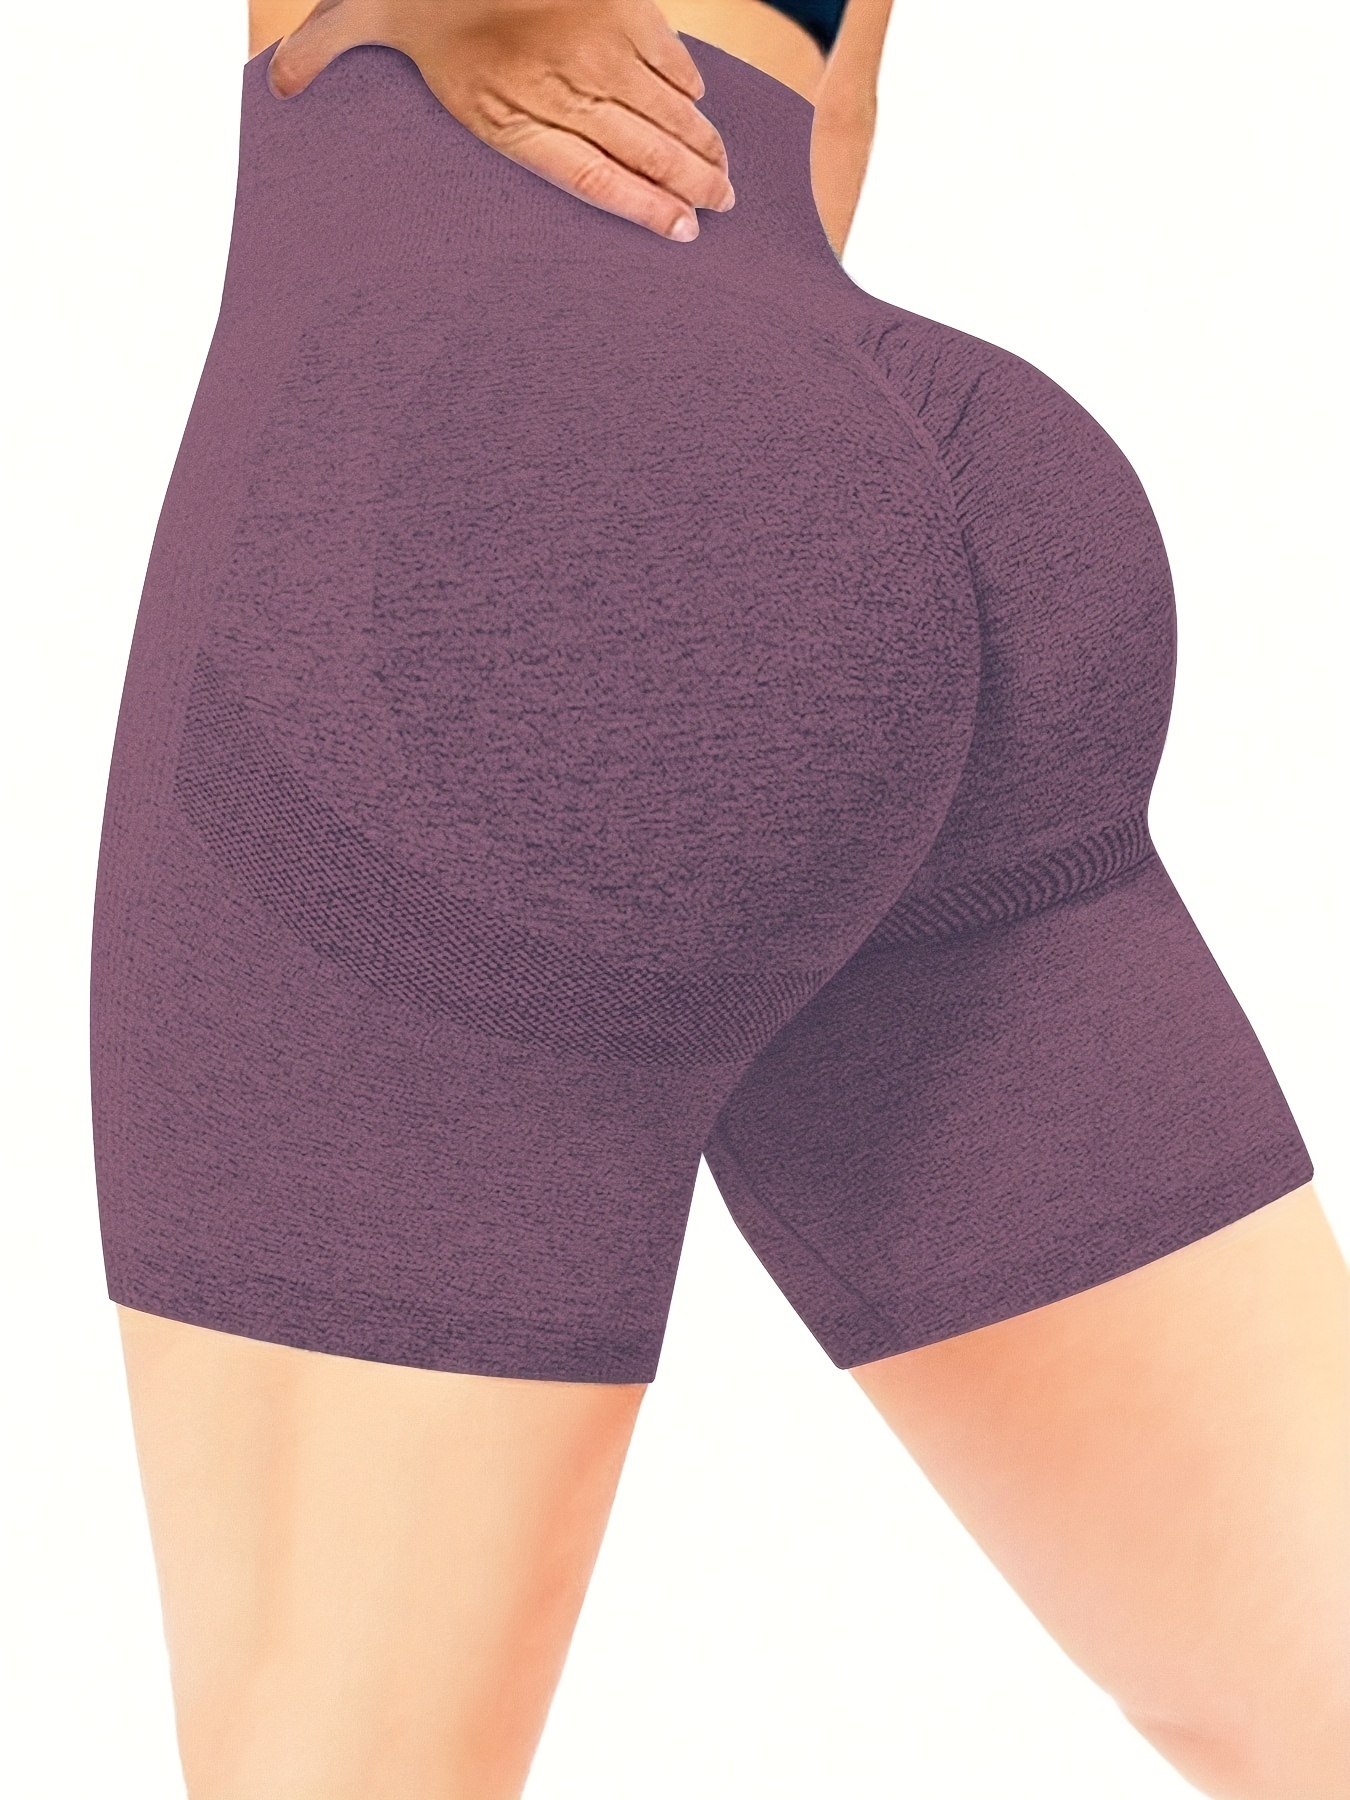 Women Butt Scrunch Workout Shorts Seamless High Waisted Amplify Gym Yoga  Athletic Booty Shorts